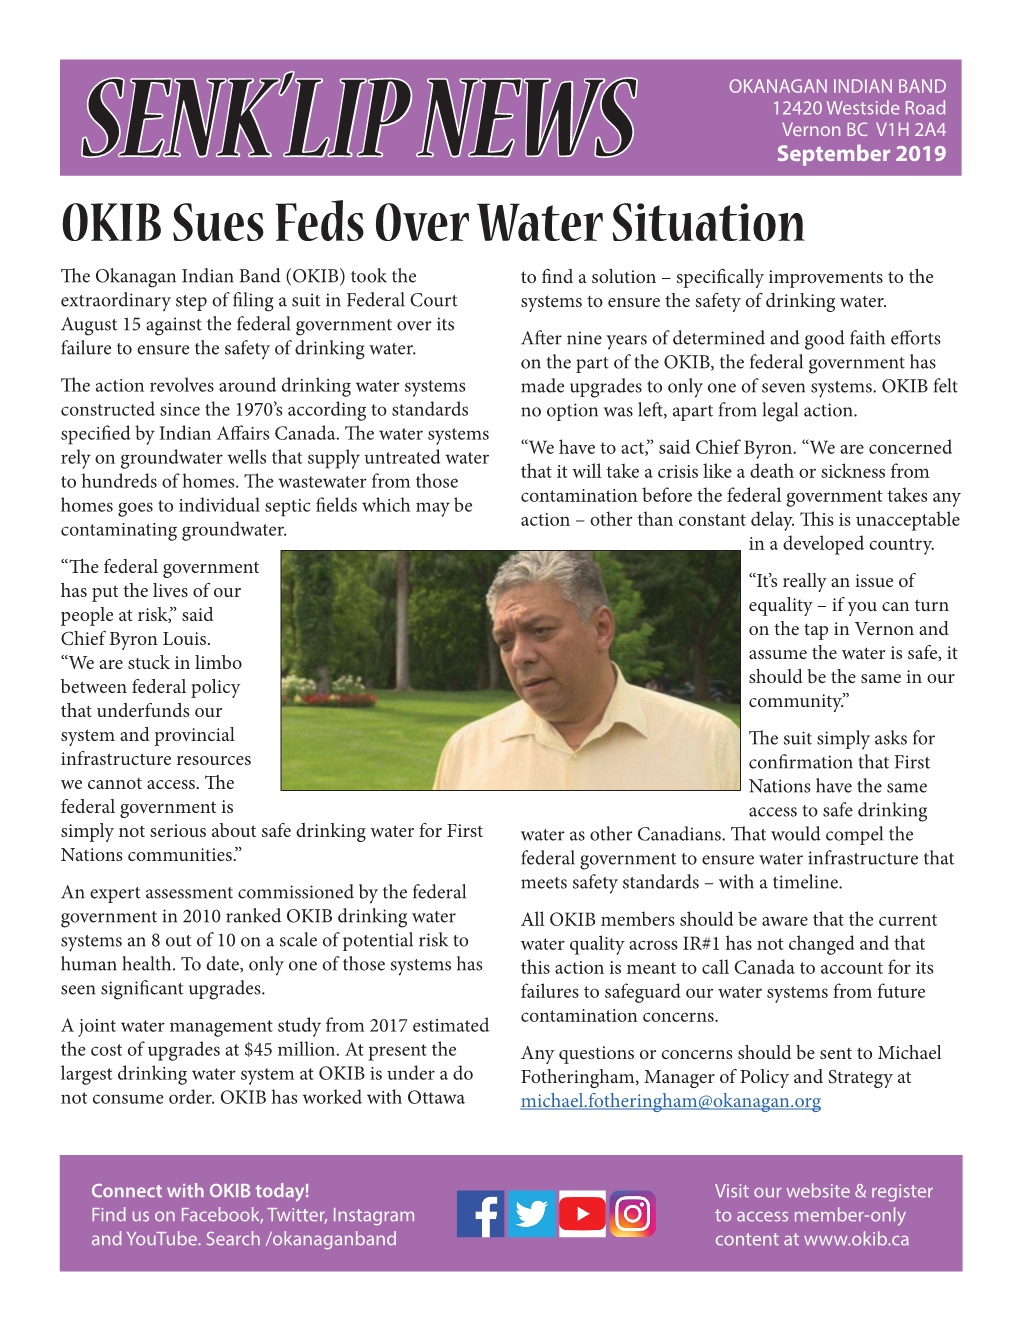 OKIB Sues Feds Over Water Situation